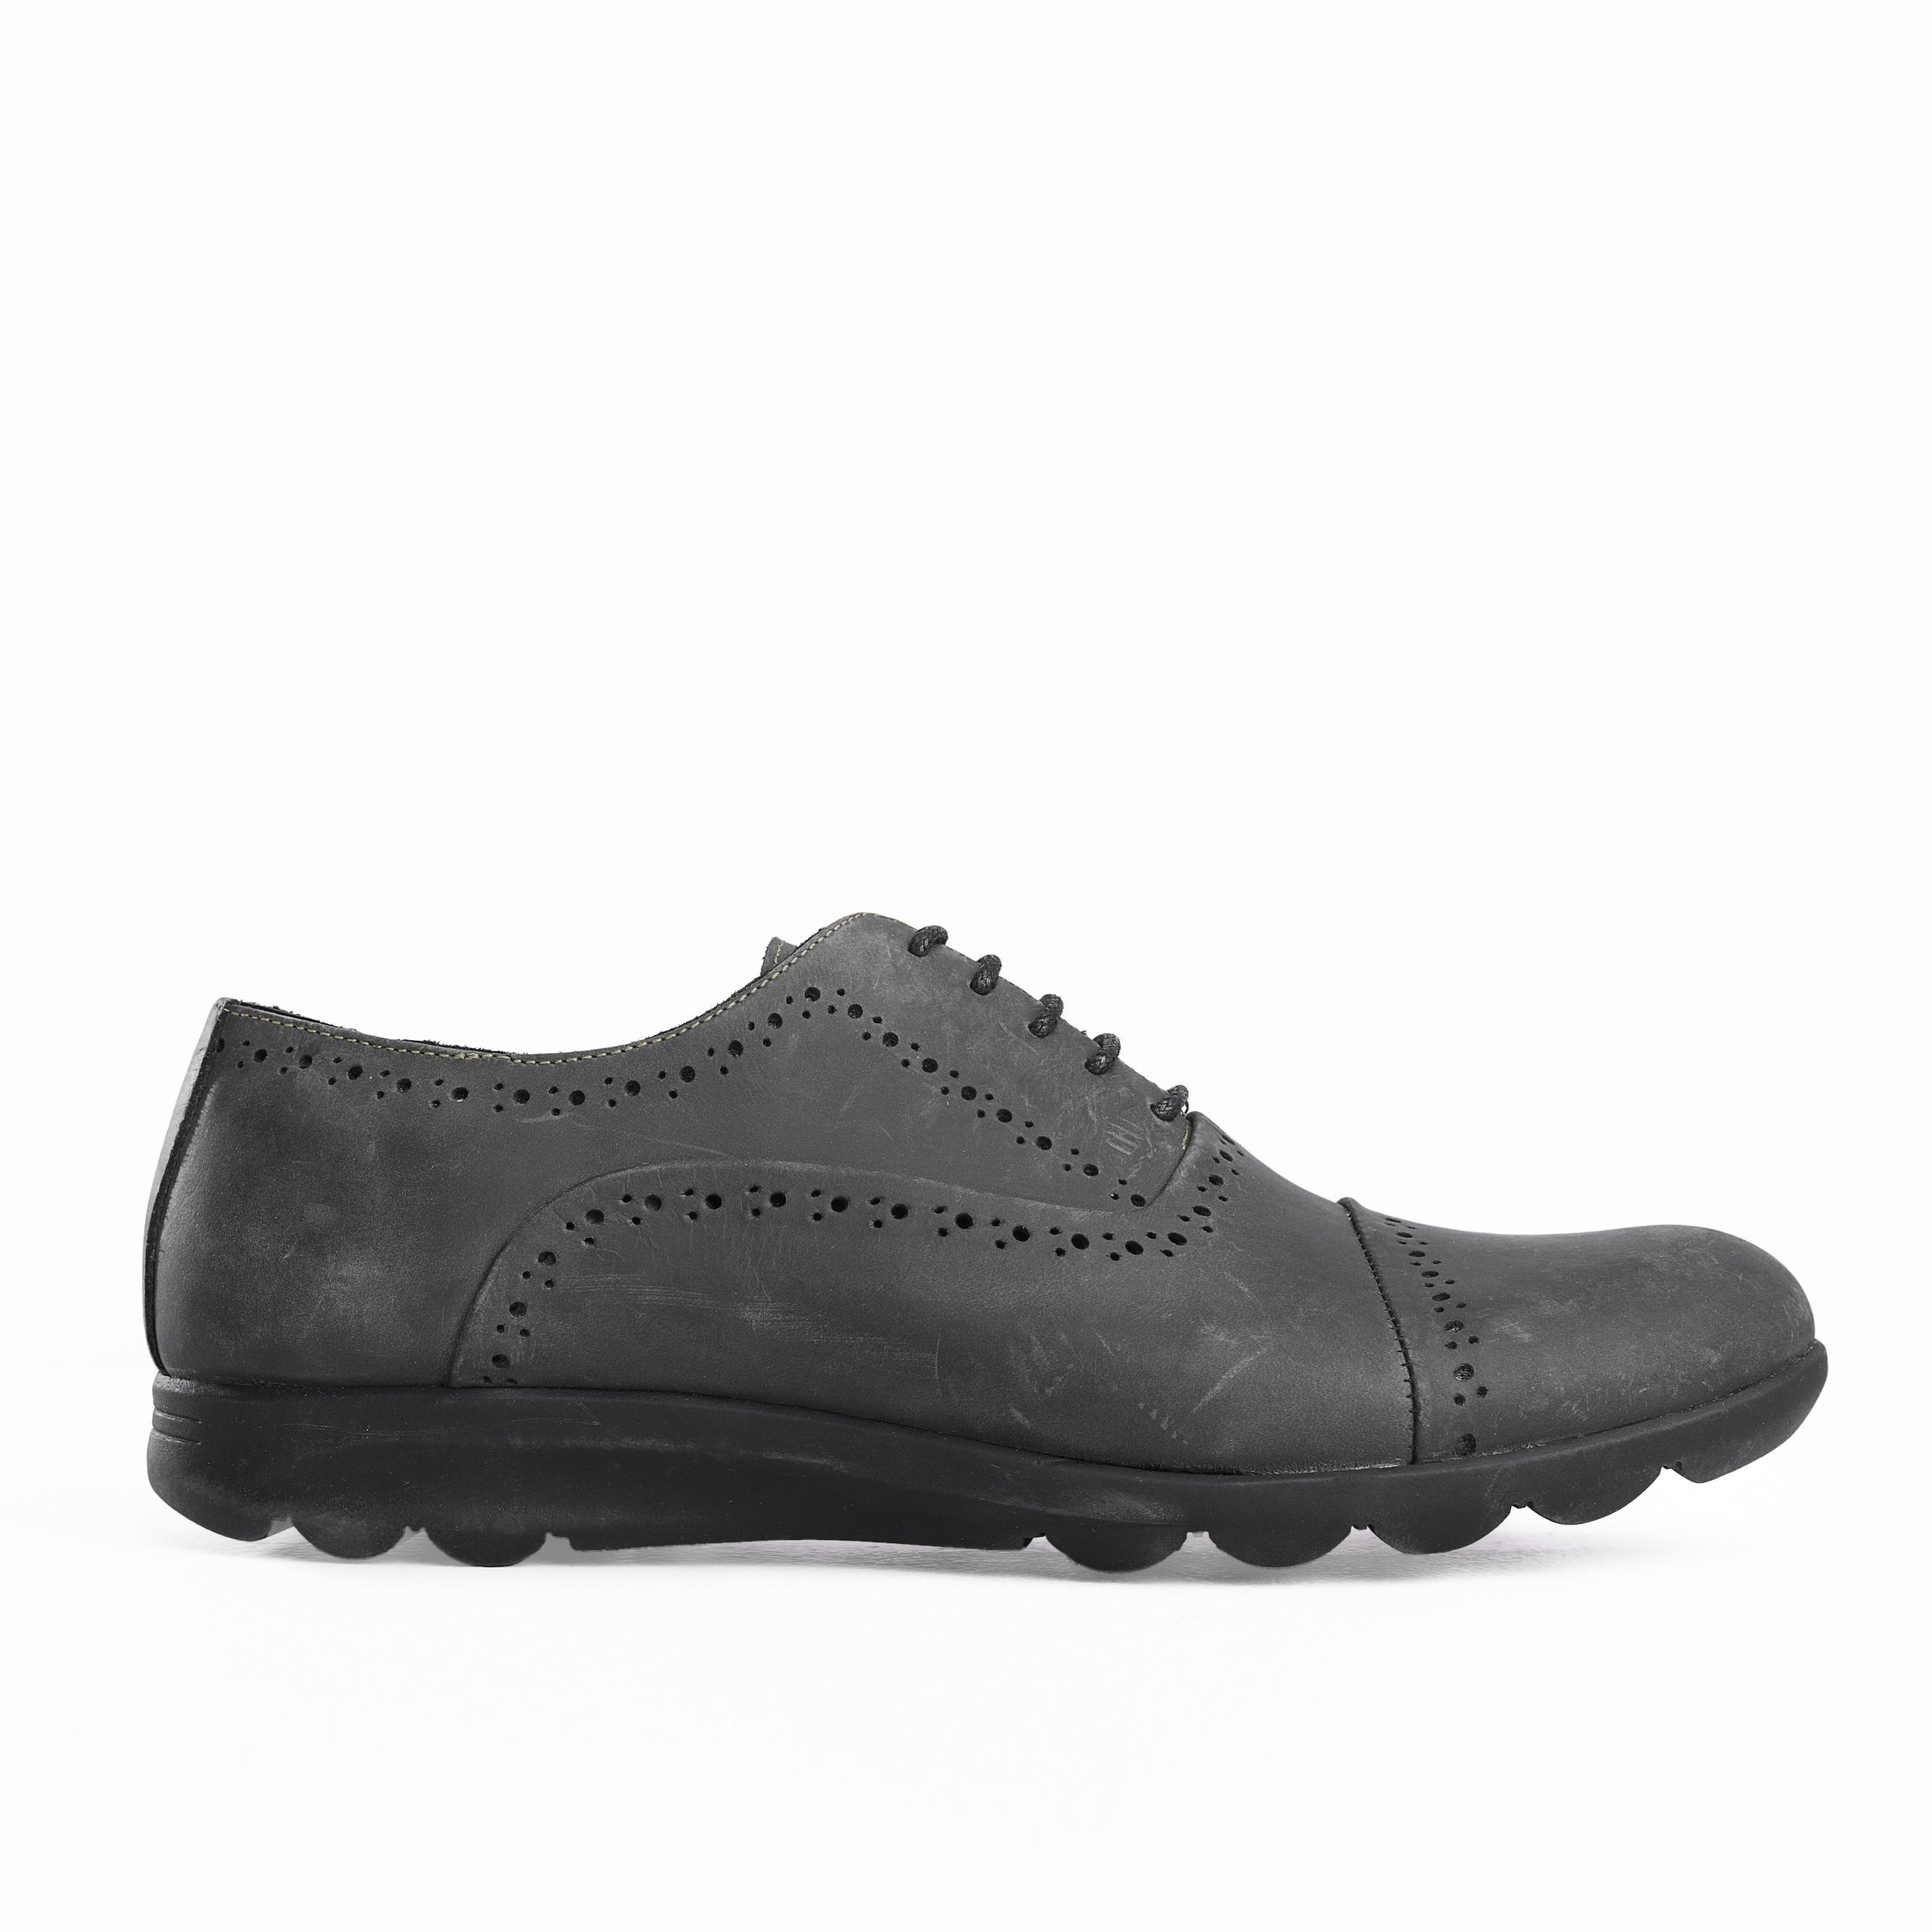 Heritage Grey Classic Shoes For Men